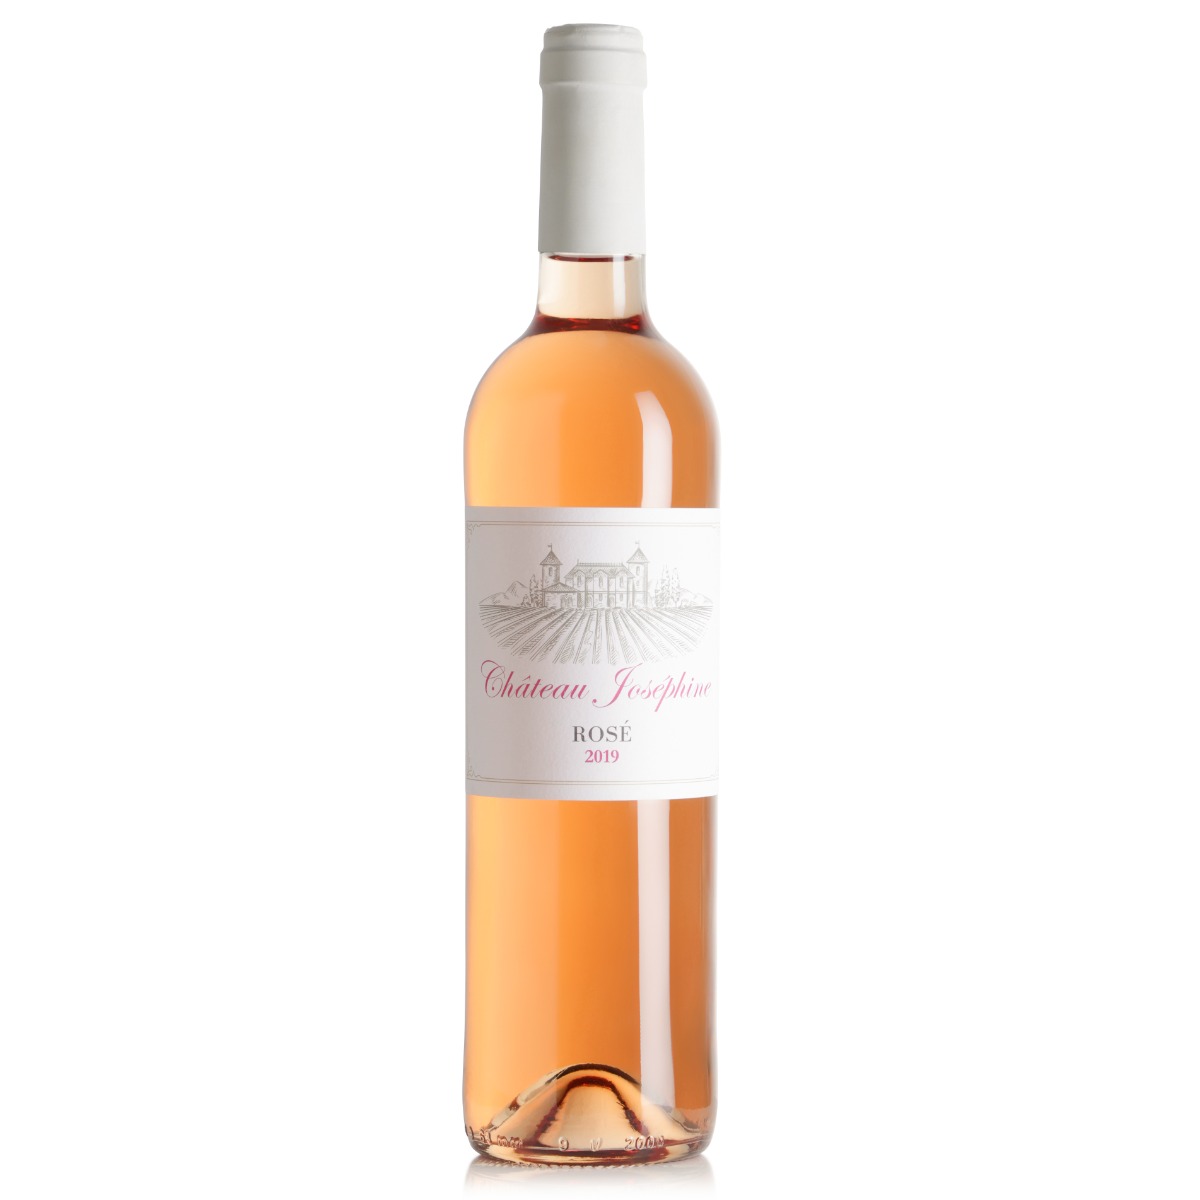 Chateau Josephine Rose - A Kosher Wine From Spain